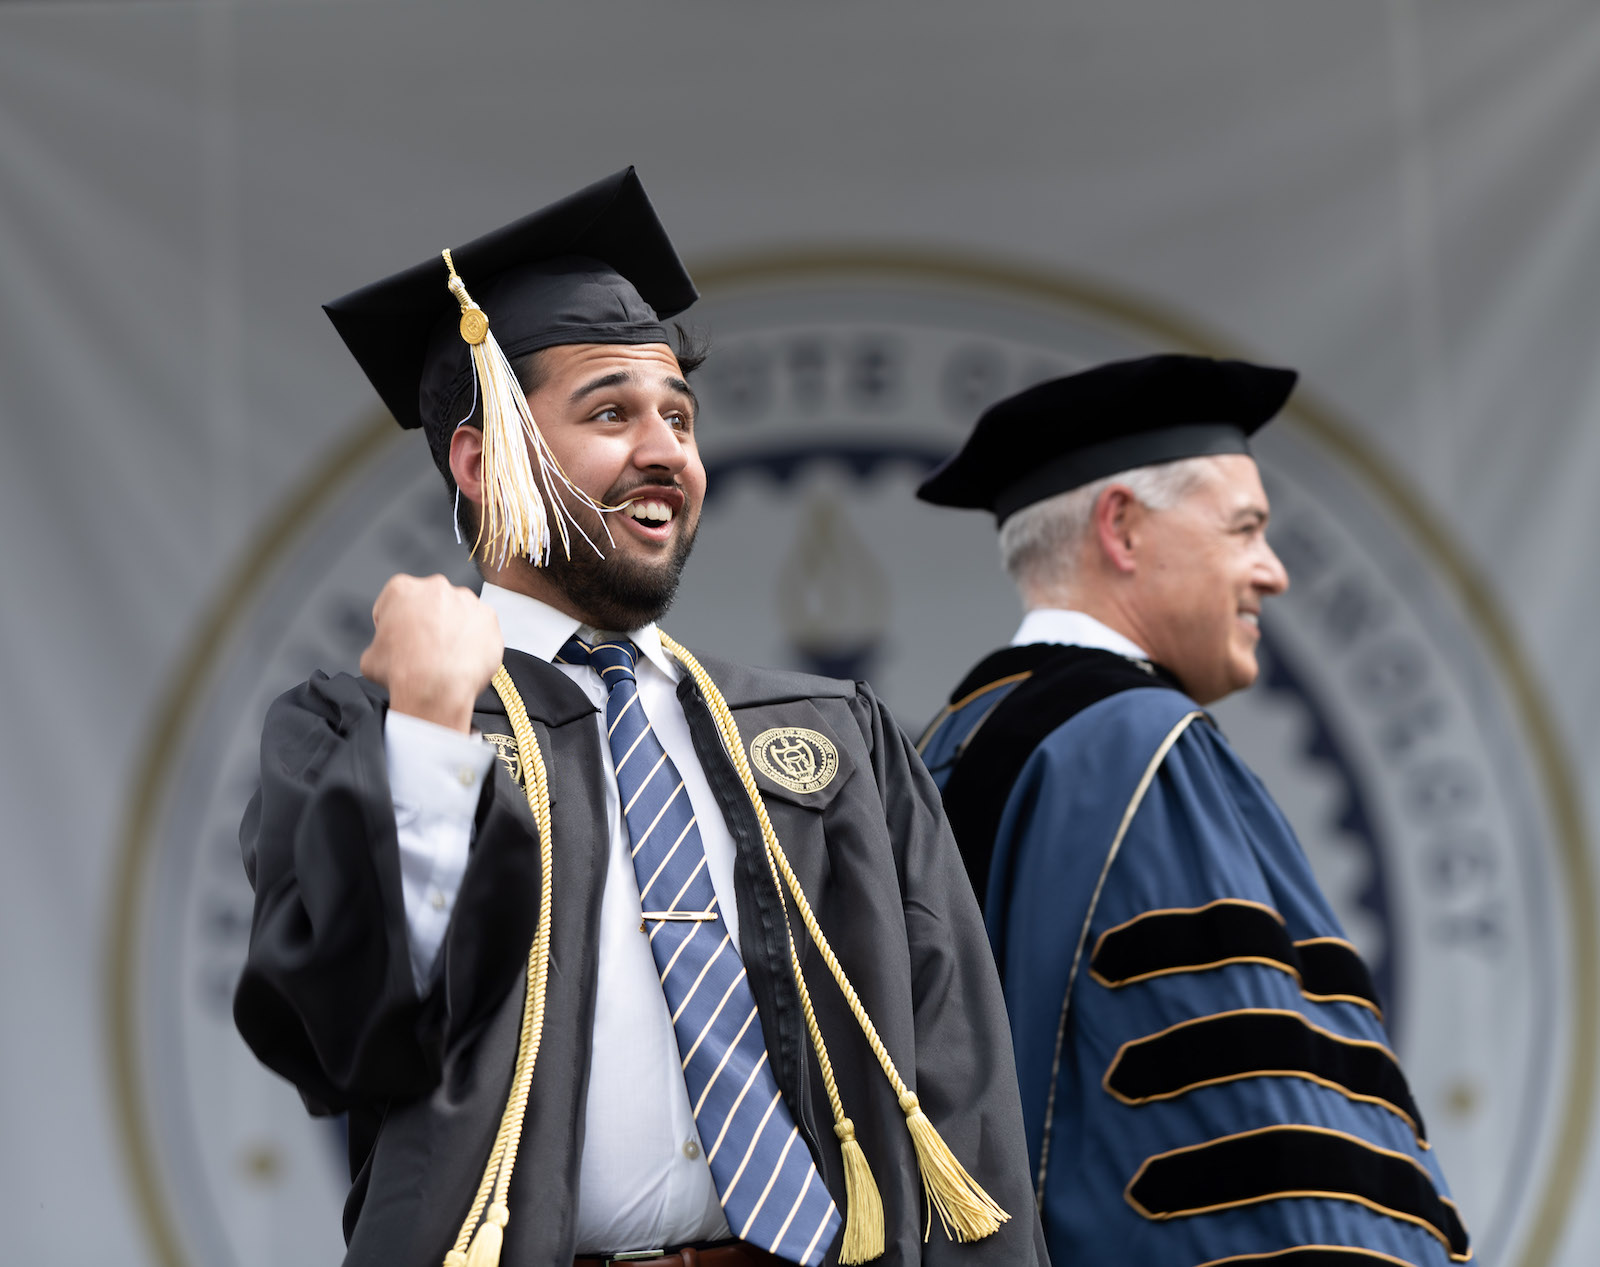 excited student on stage at bachelor's ceremony